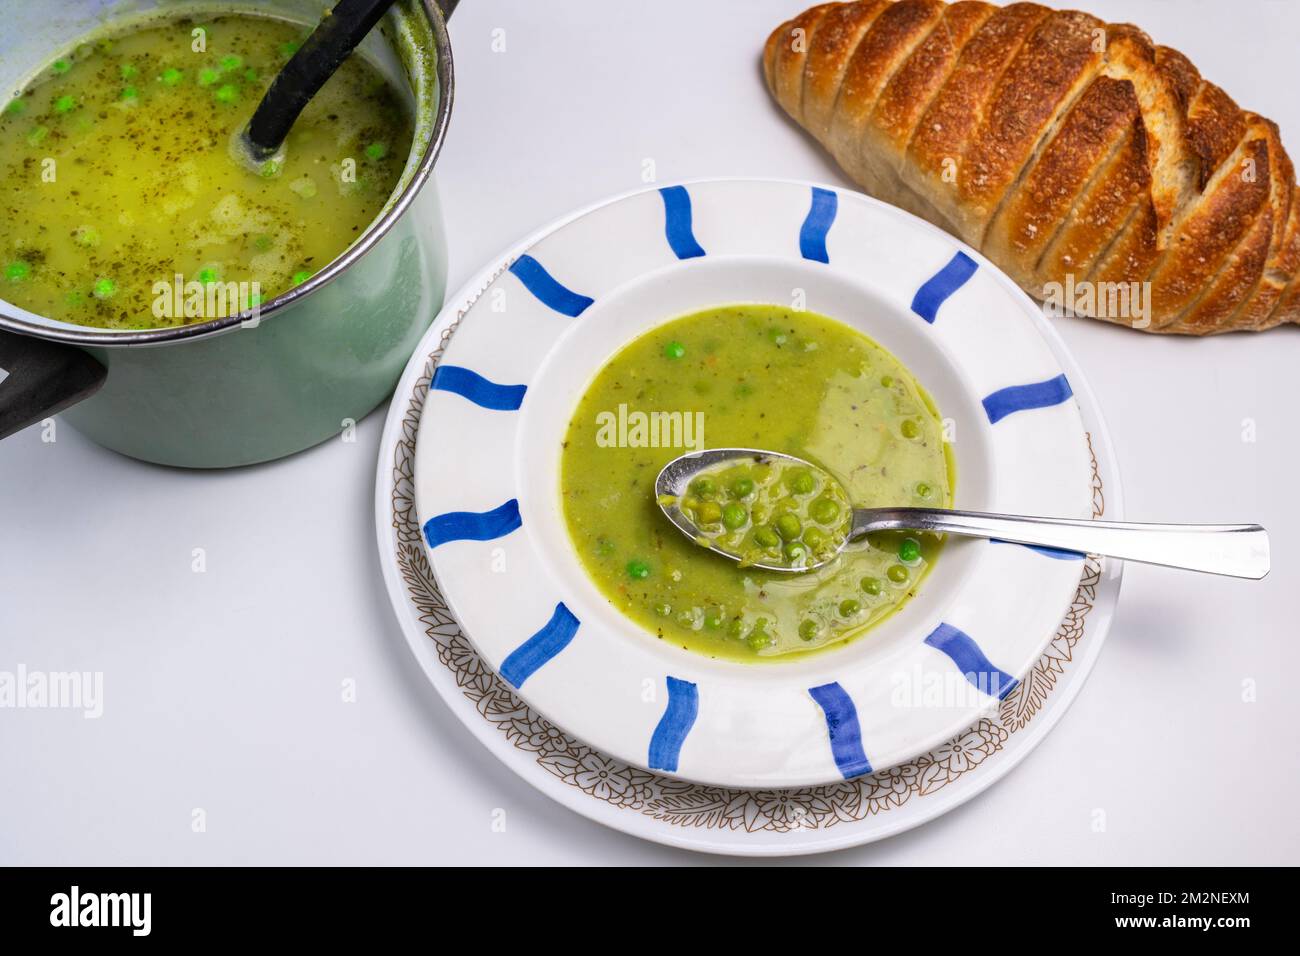 Pea soup in striped plate and pot, spoon and bread on white background. Stock Photo